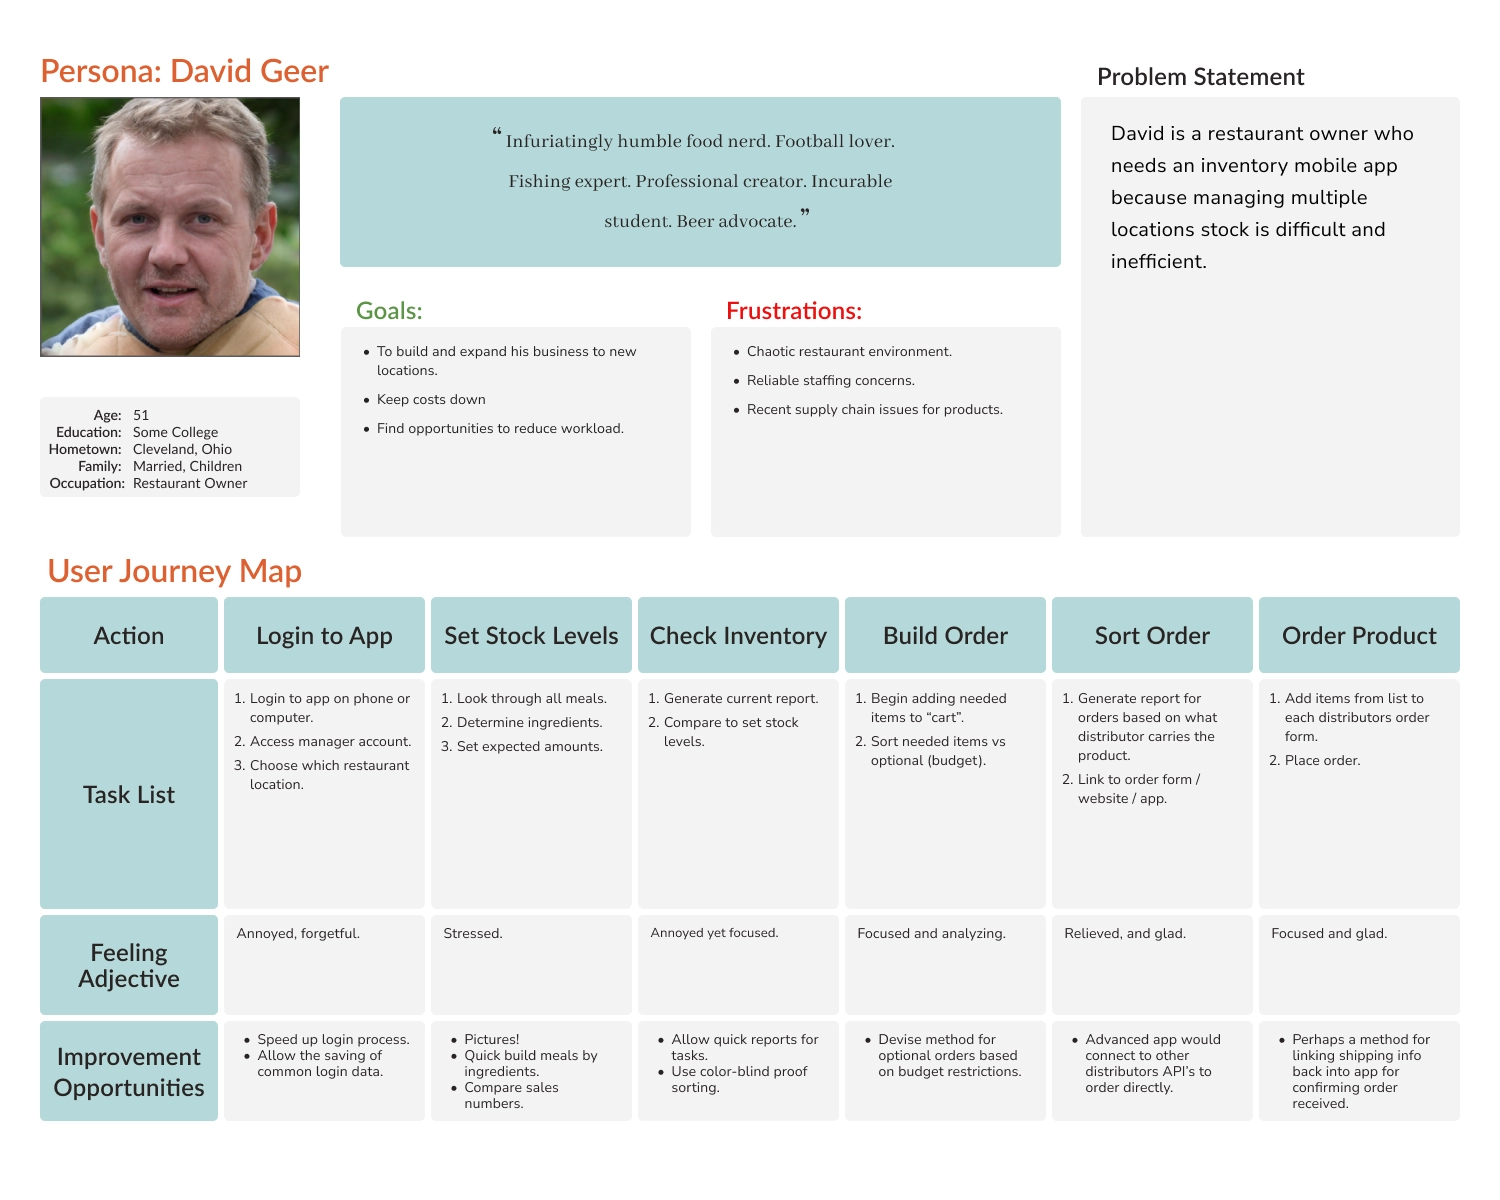 Personas and Journey Maps